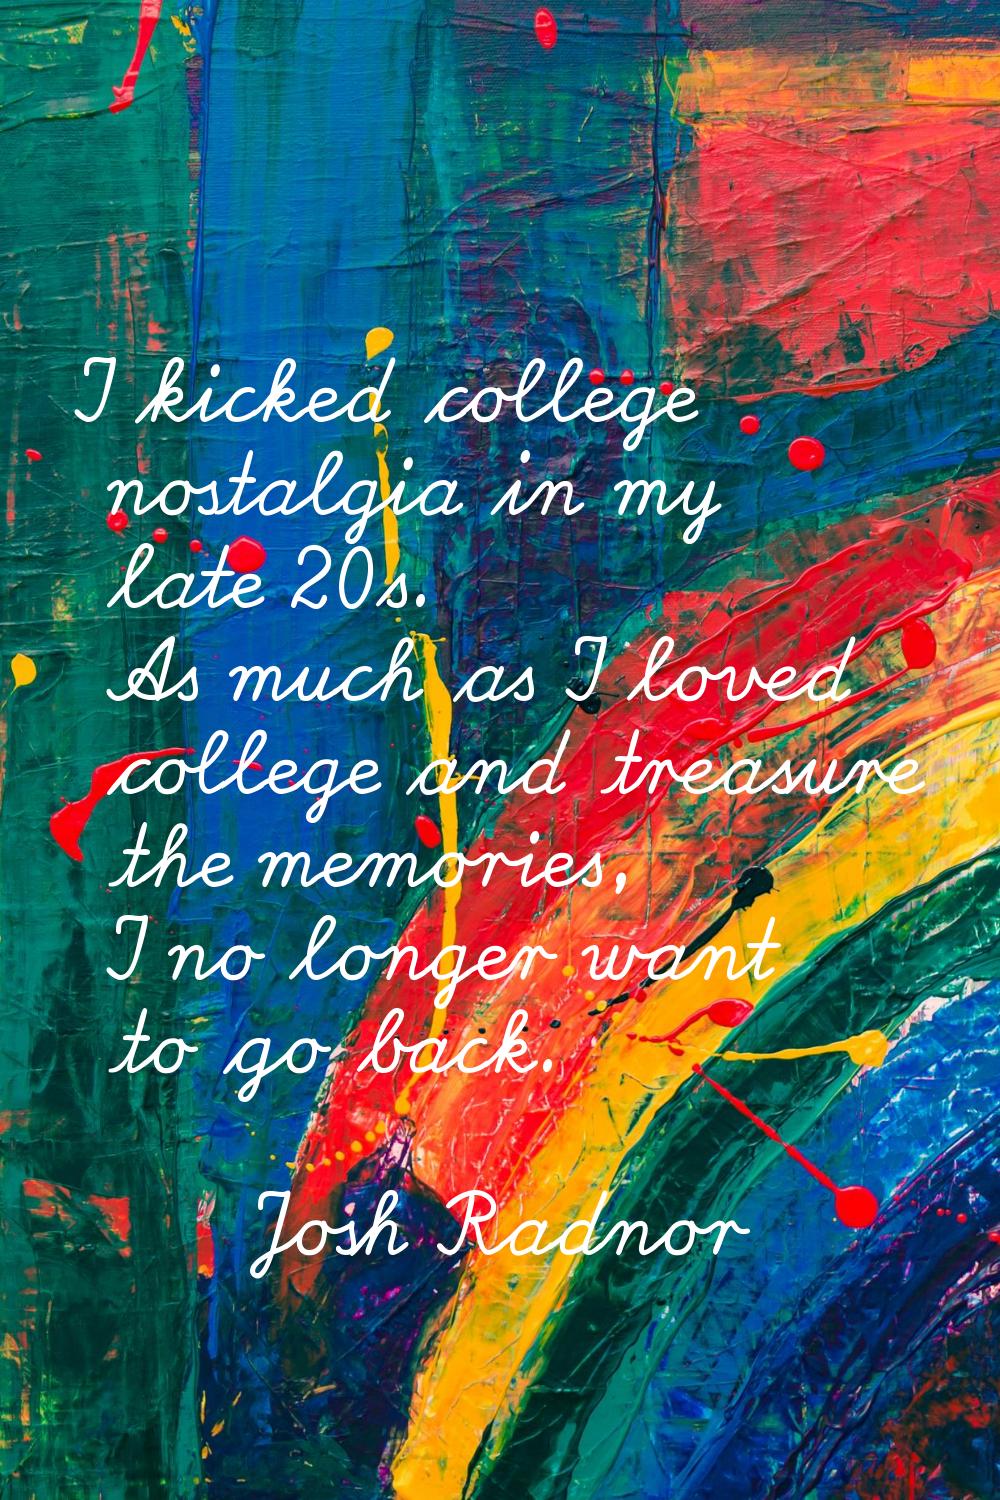 I kicked college nostalgia in my late 20s. As much as I loved college and treasure the memories, I 